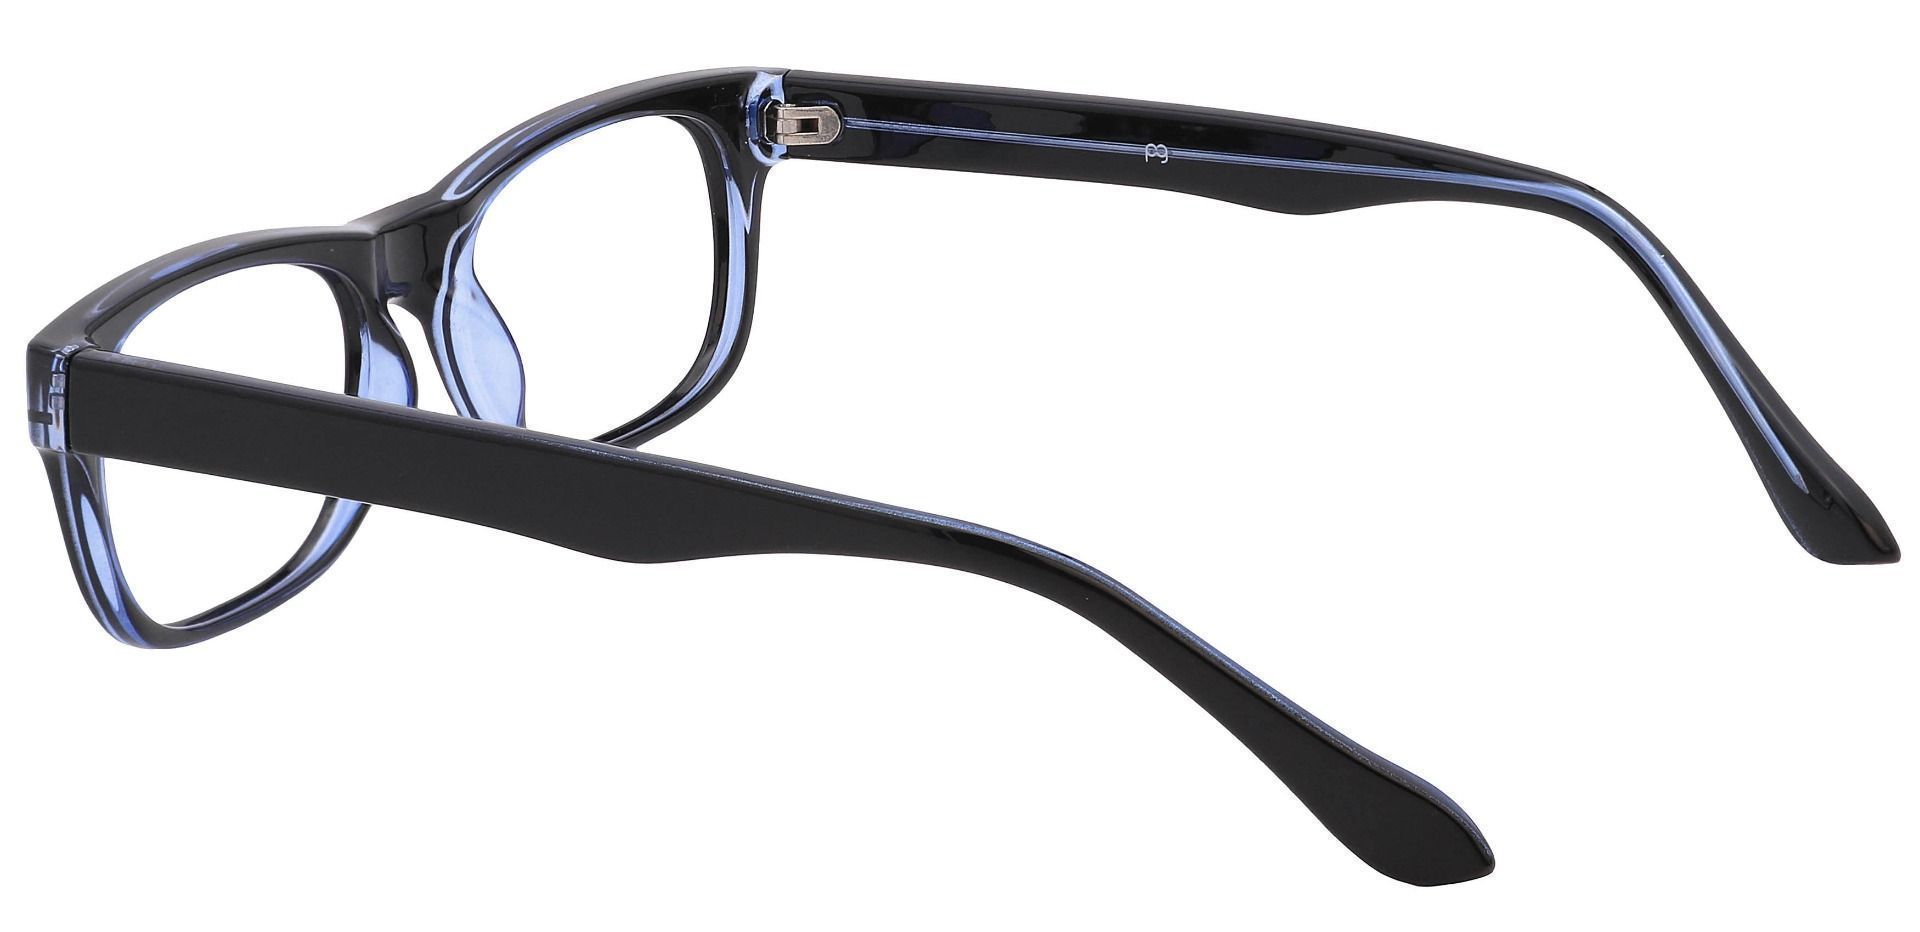 Murphy Rectangle Blue Light Blocking Glasses - The Frame Is Blue And Black